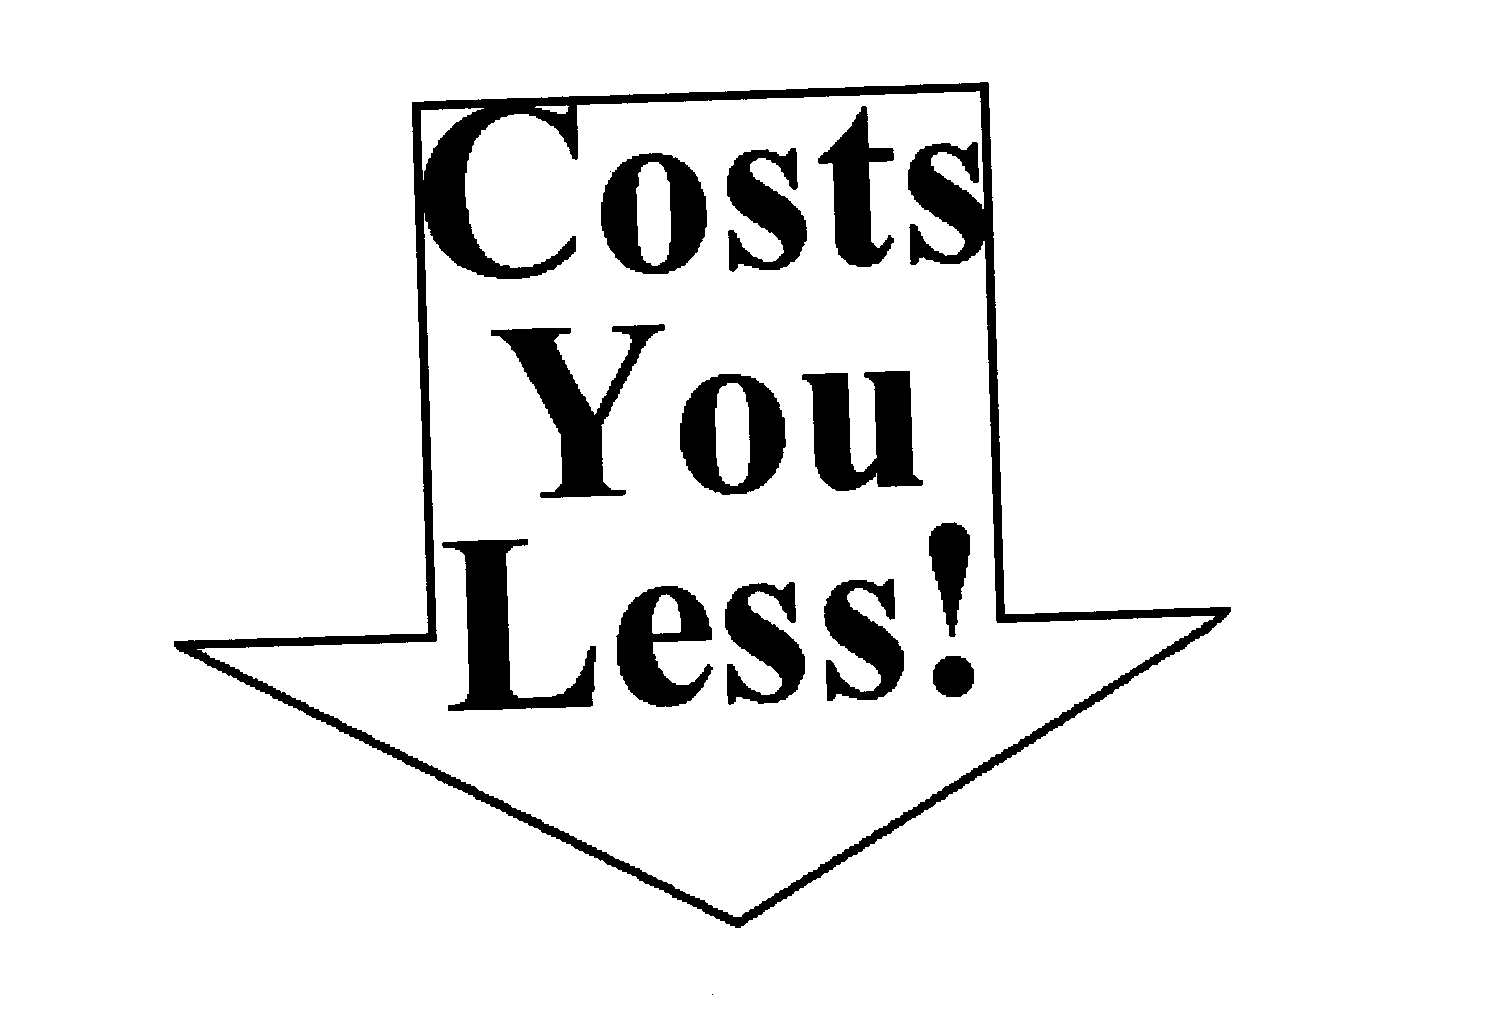  COSTS YOU LESS!